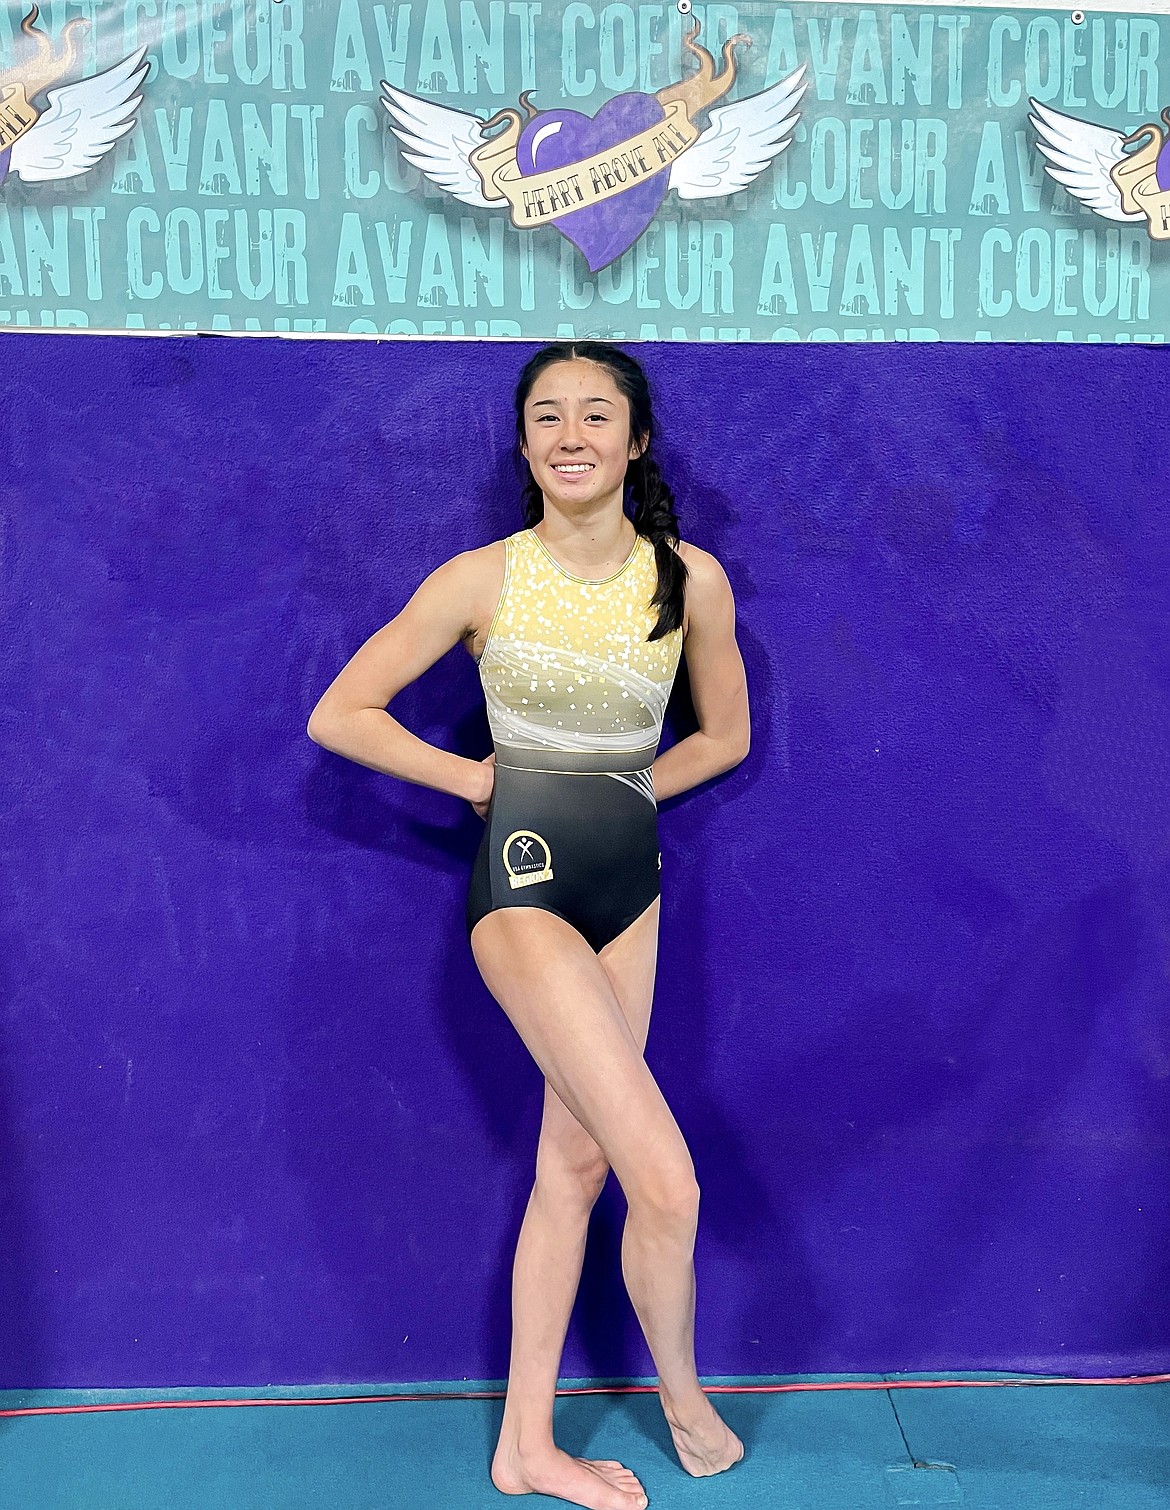 Courtesy photo
Avant Coeur Gymnastics freshman Level 10 Maiya Terry qualified for the national championships this past weekend during her regional competition in Vancouver, Wash. She will compete against Level 10s from all over the United States on May 14 in Mesa, Ariz. She is Avant Coeur’s first Level 10 to qualify since 2015.